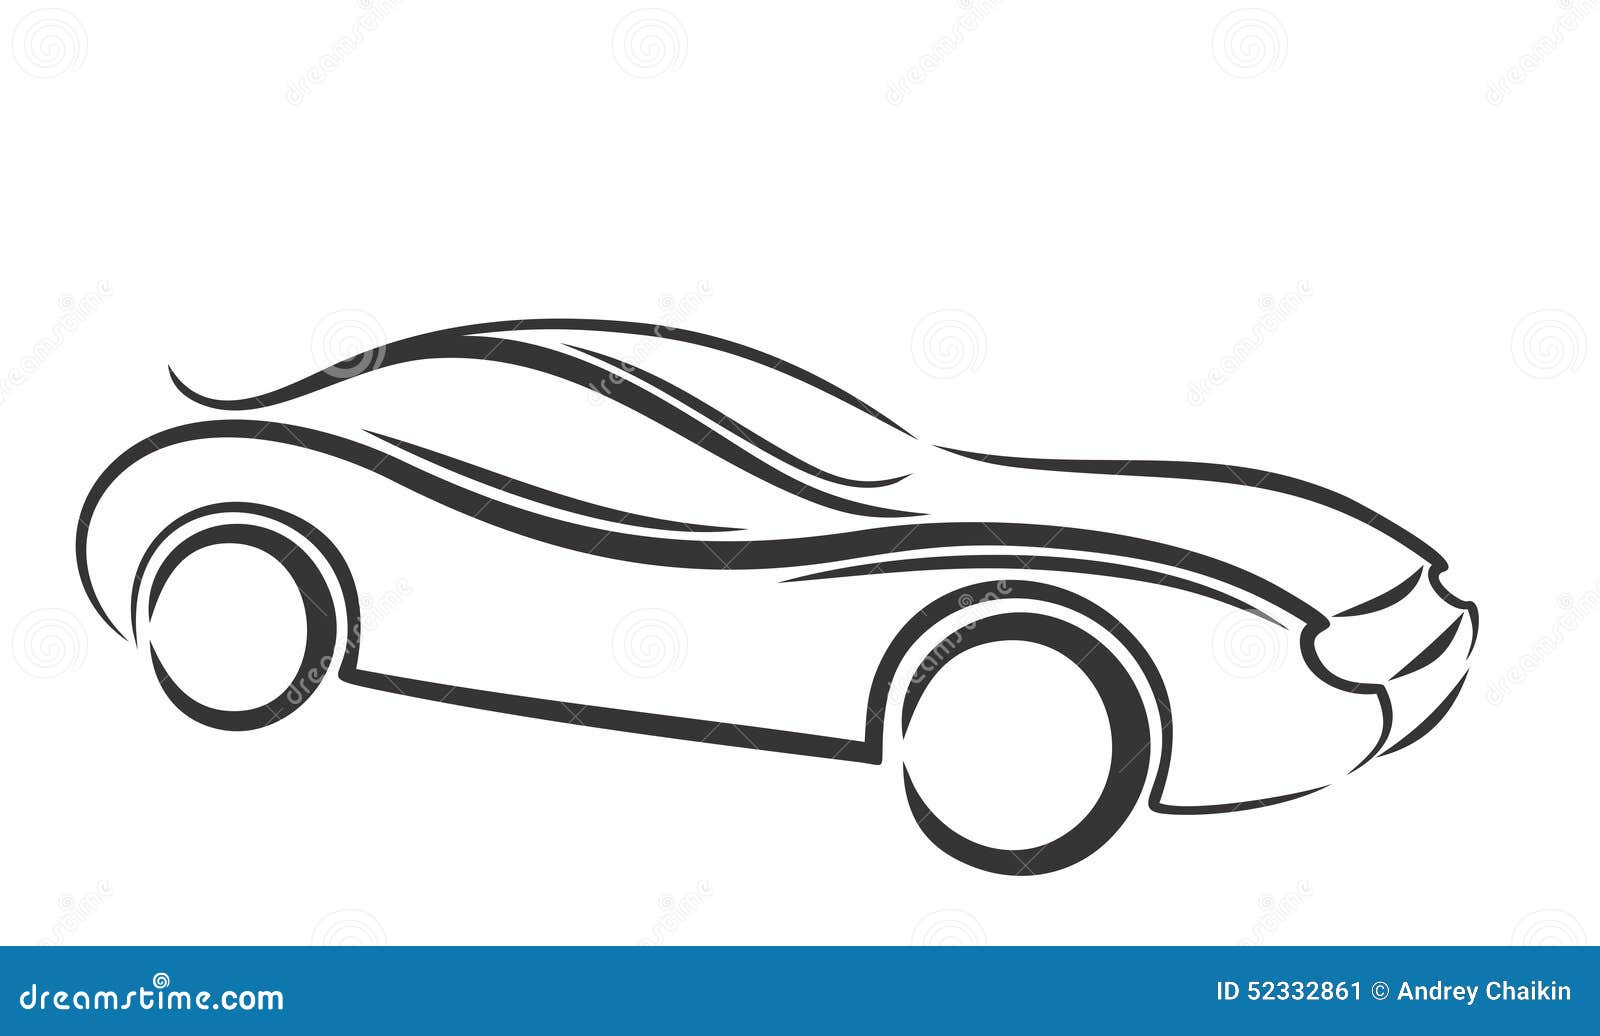 How Accurately Can You Draw a Car Logo from Memory